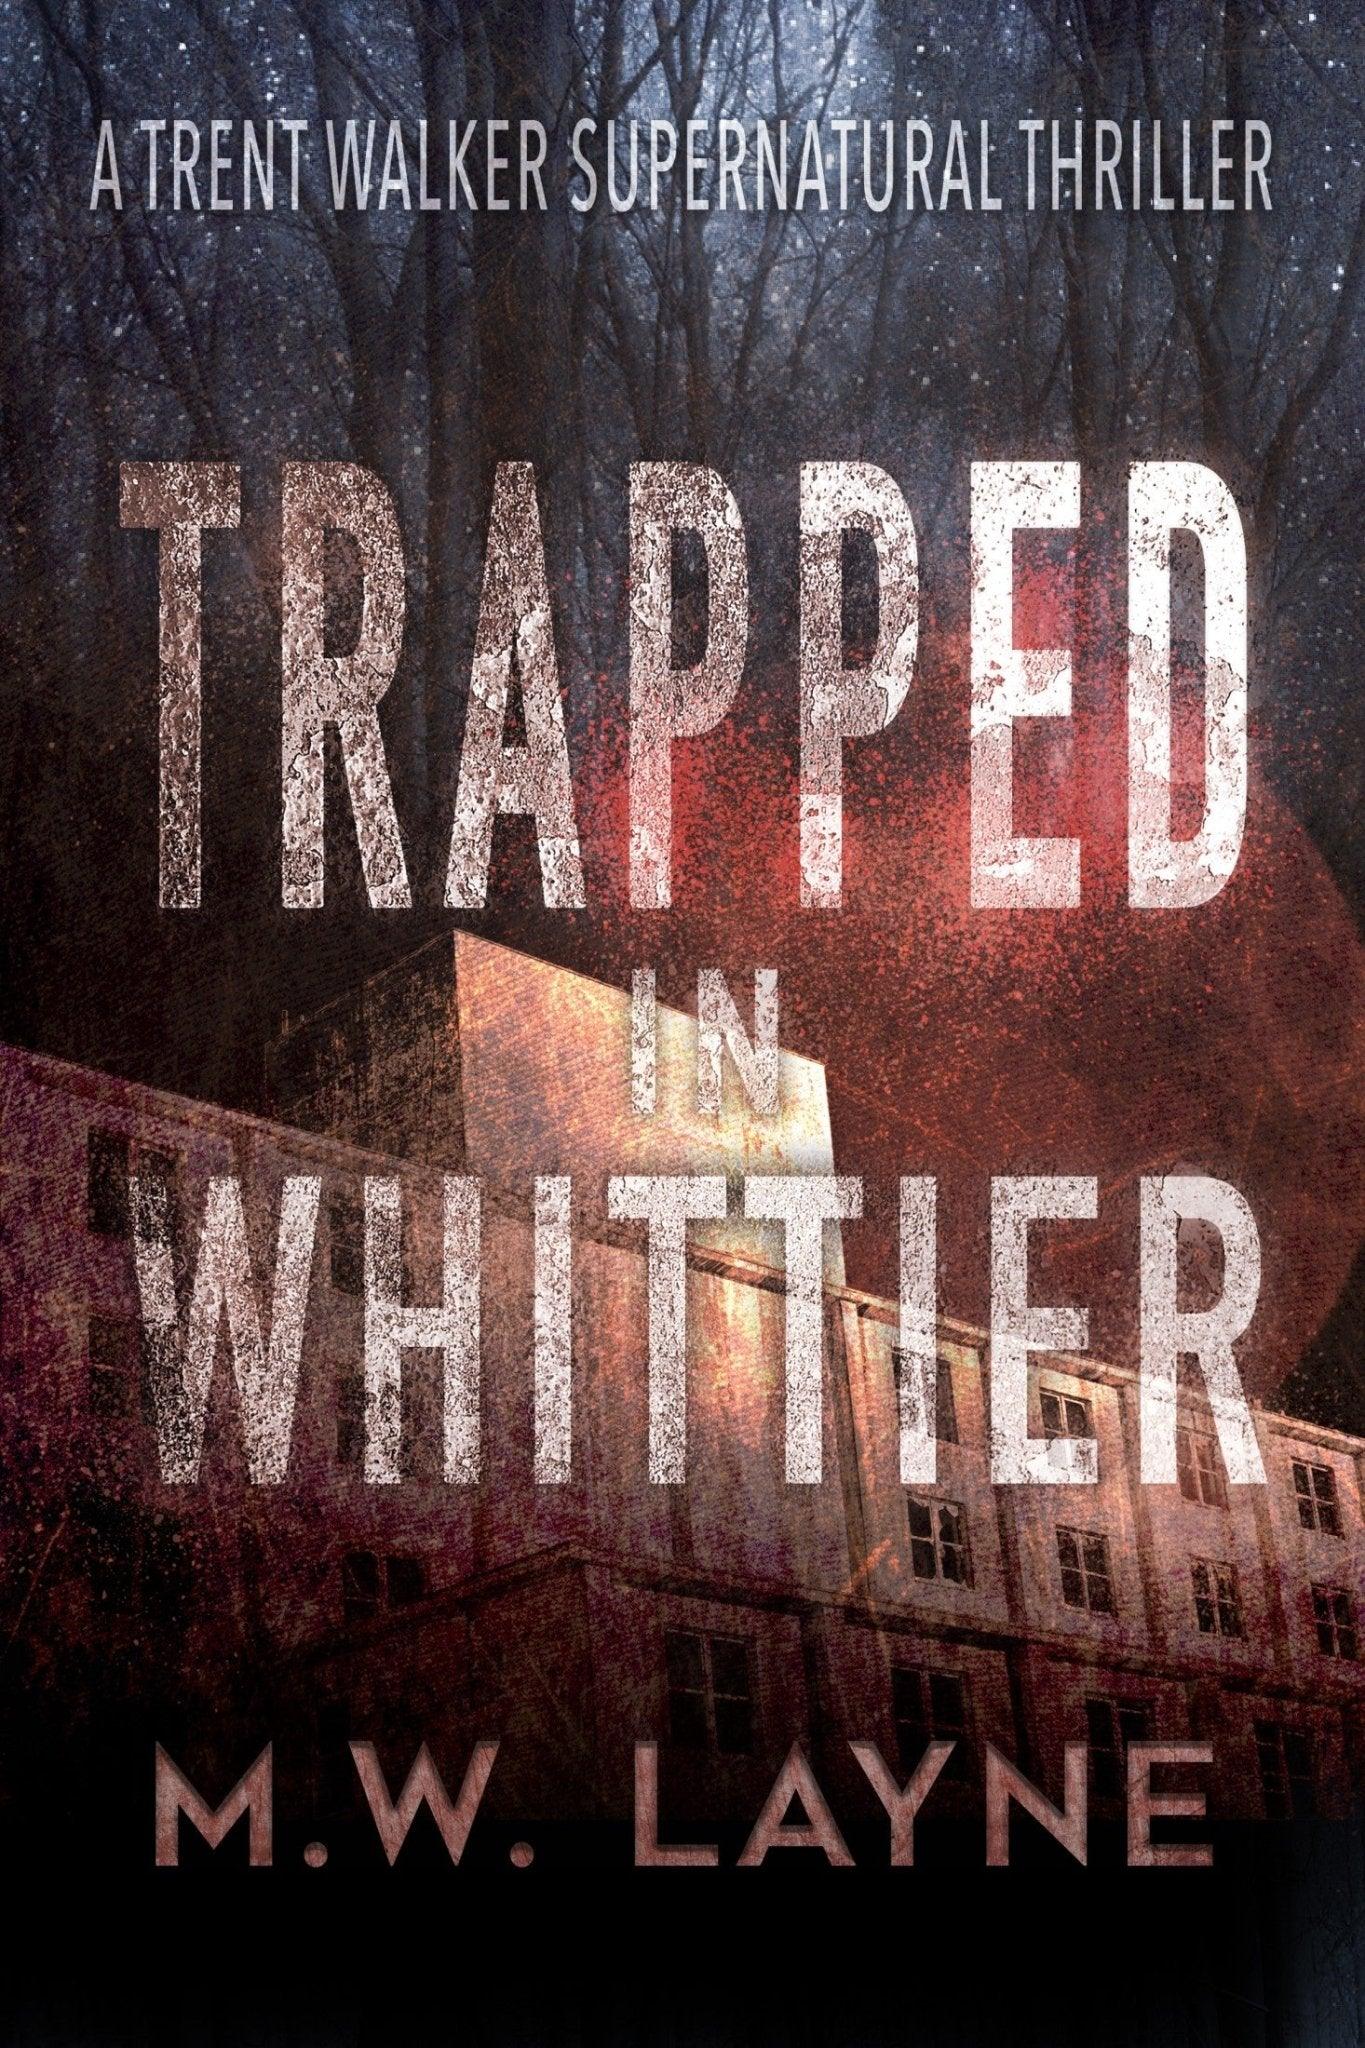 Trapped in Whittier - Writer Layne Publishing